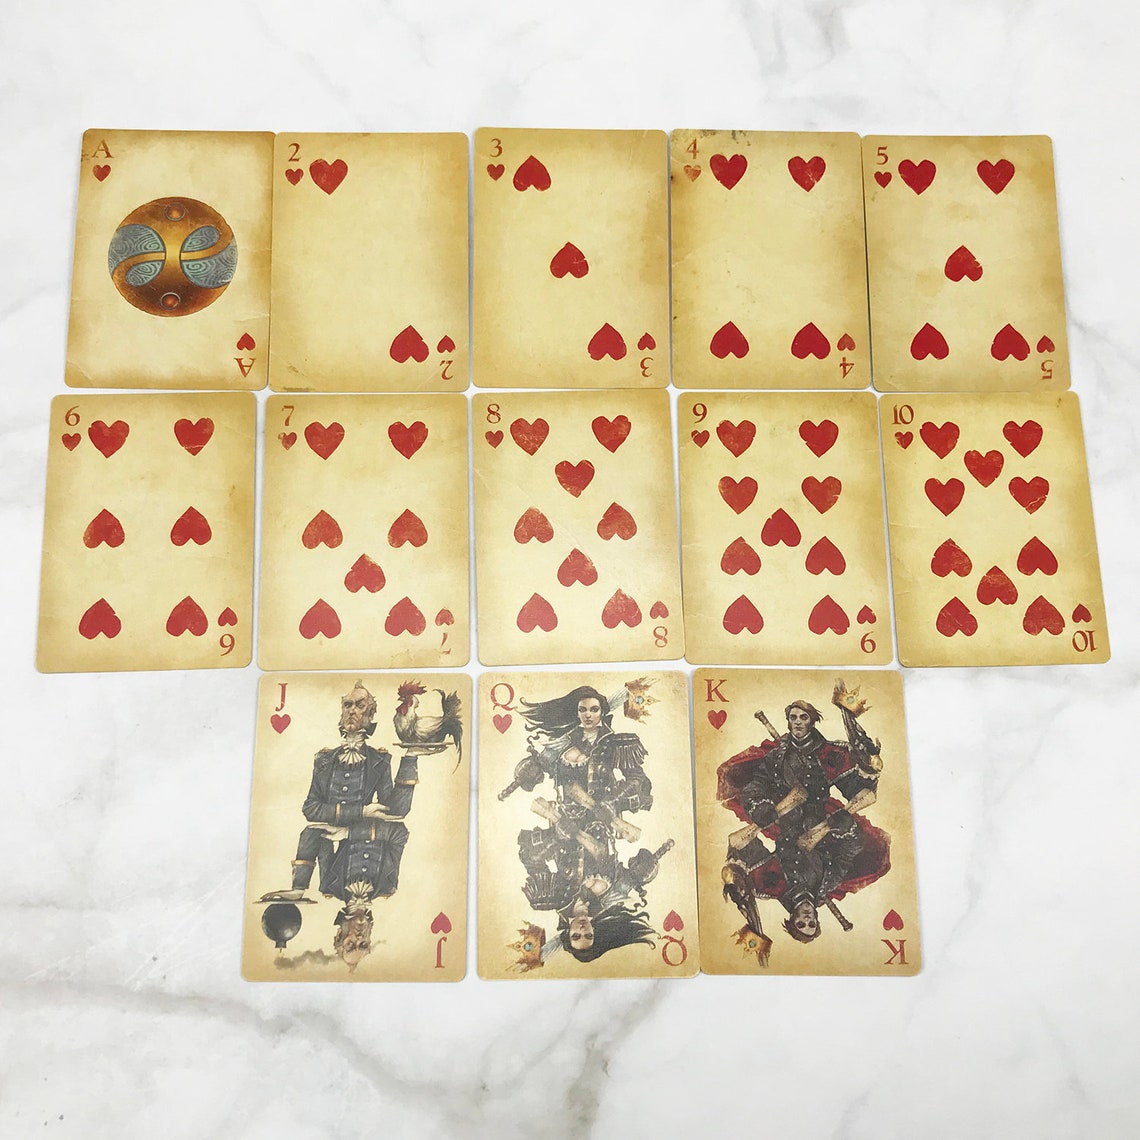 vintage-style-playing-cards-poker-playing-cards-from-fable-iii-etsy